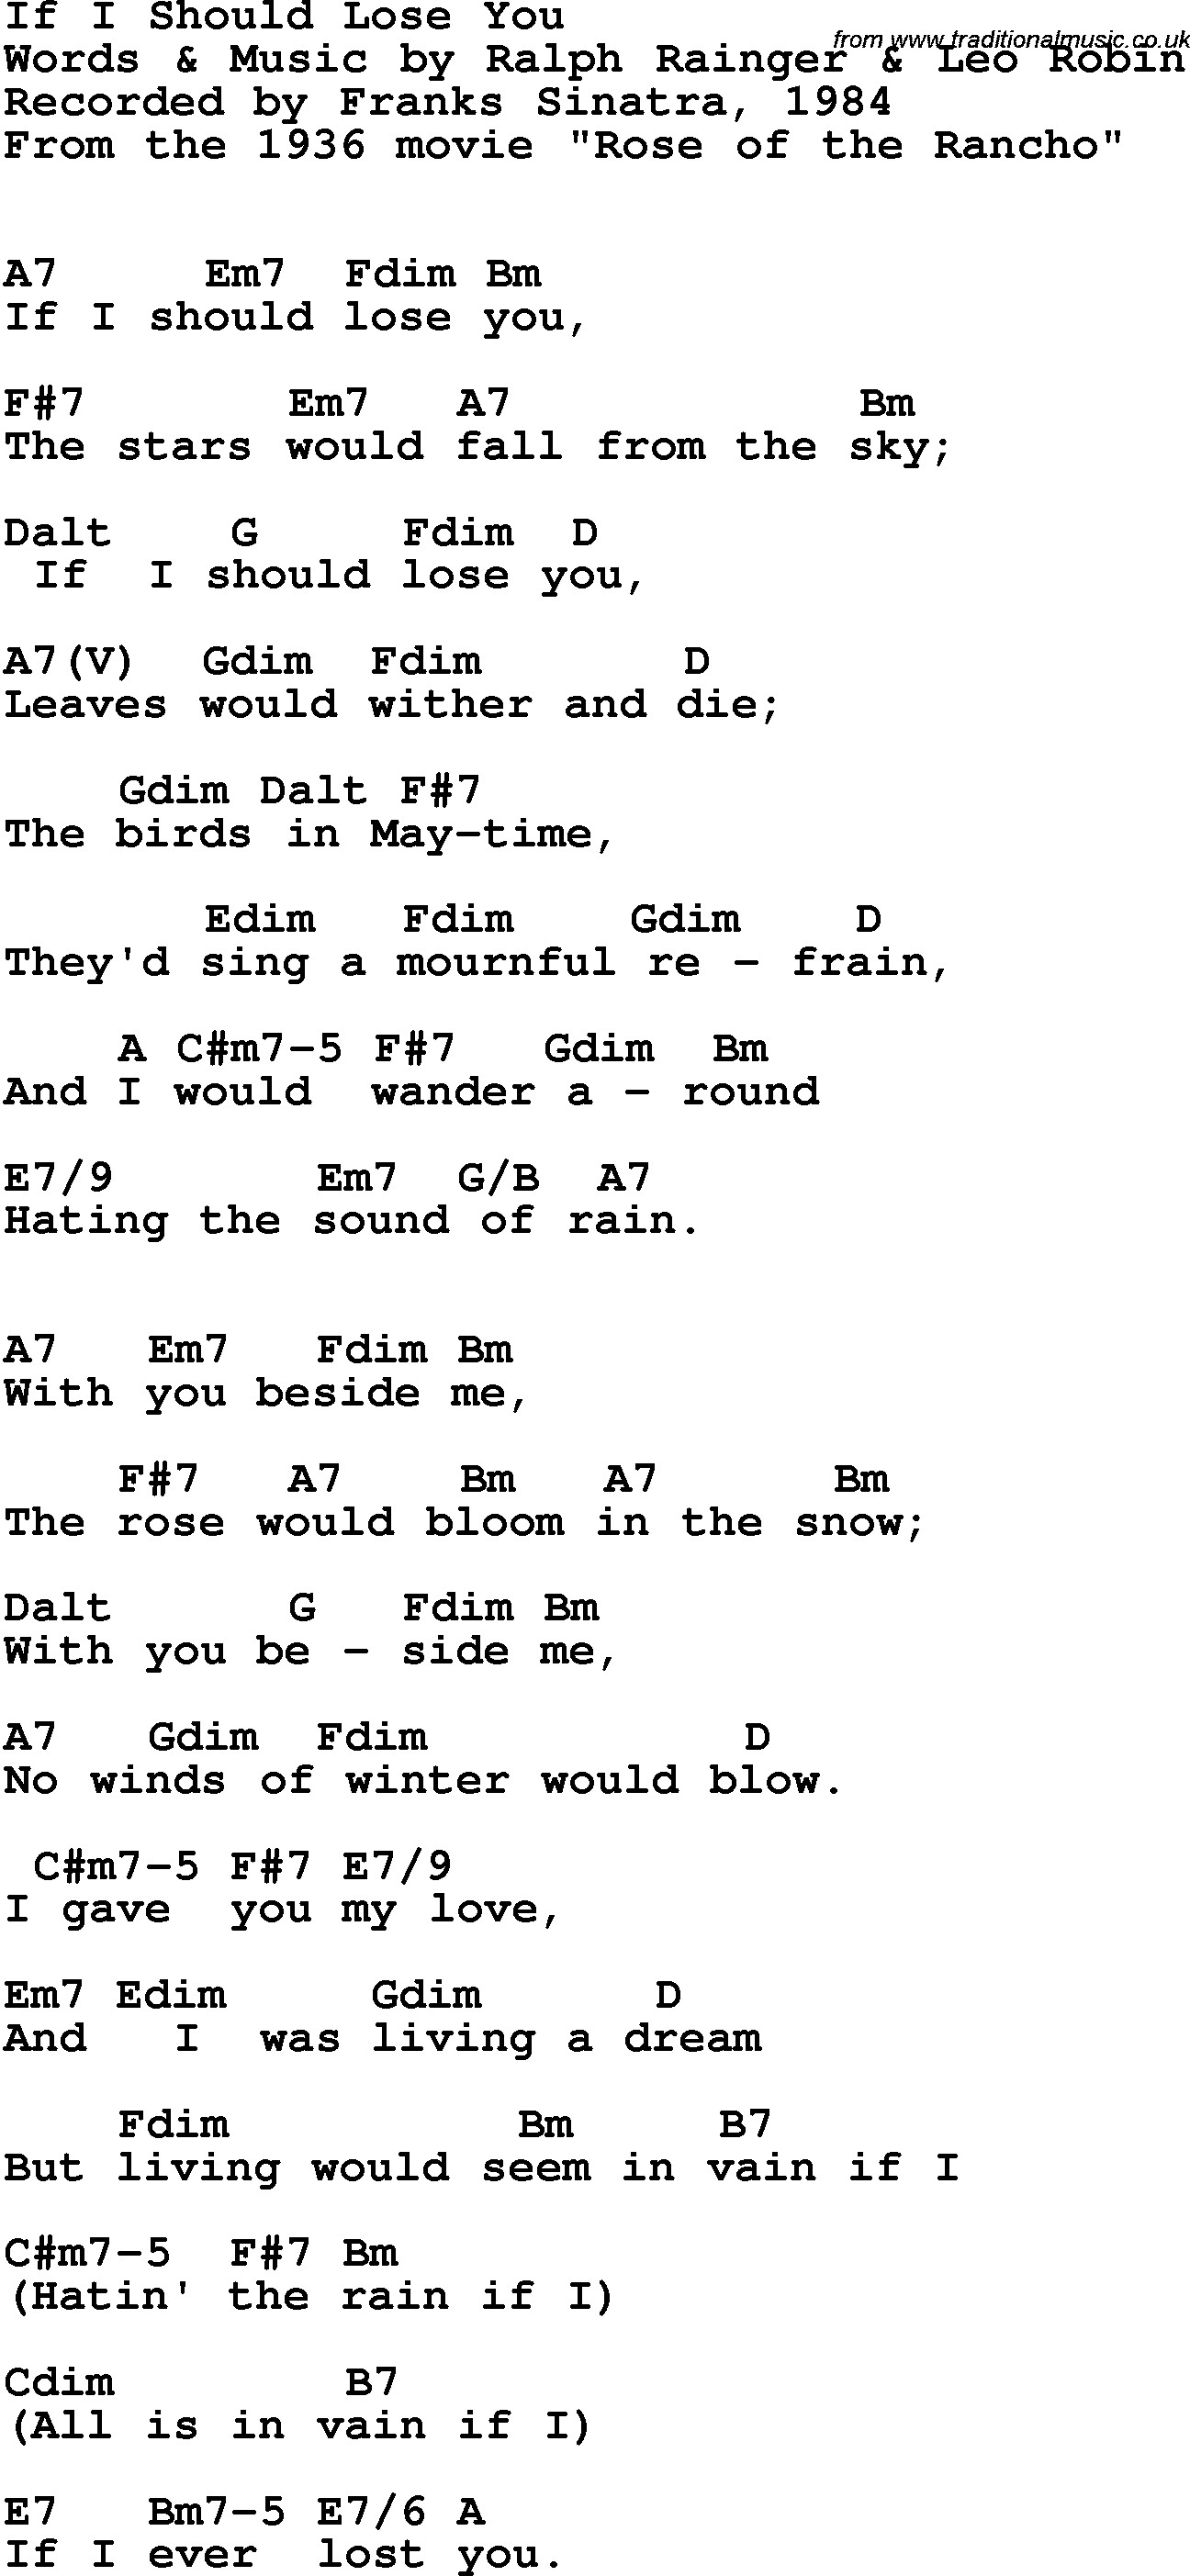 Song Lyrics with guitar chords for If I Should Lose You - Frank Sinatra, 1984